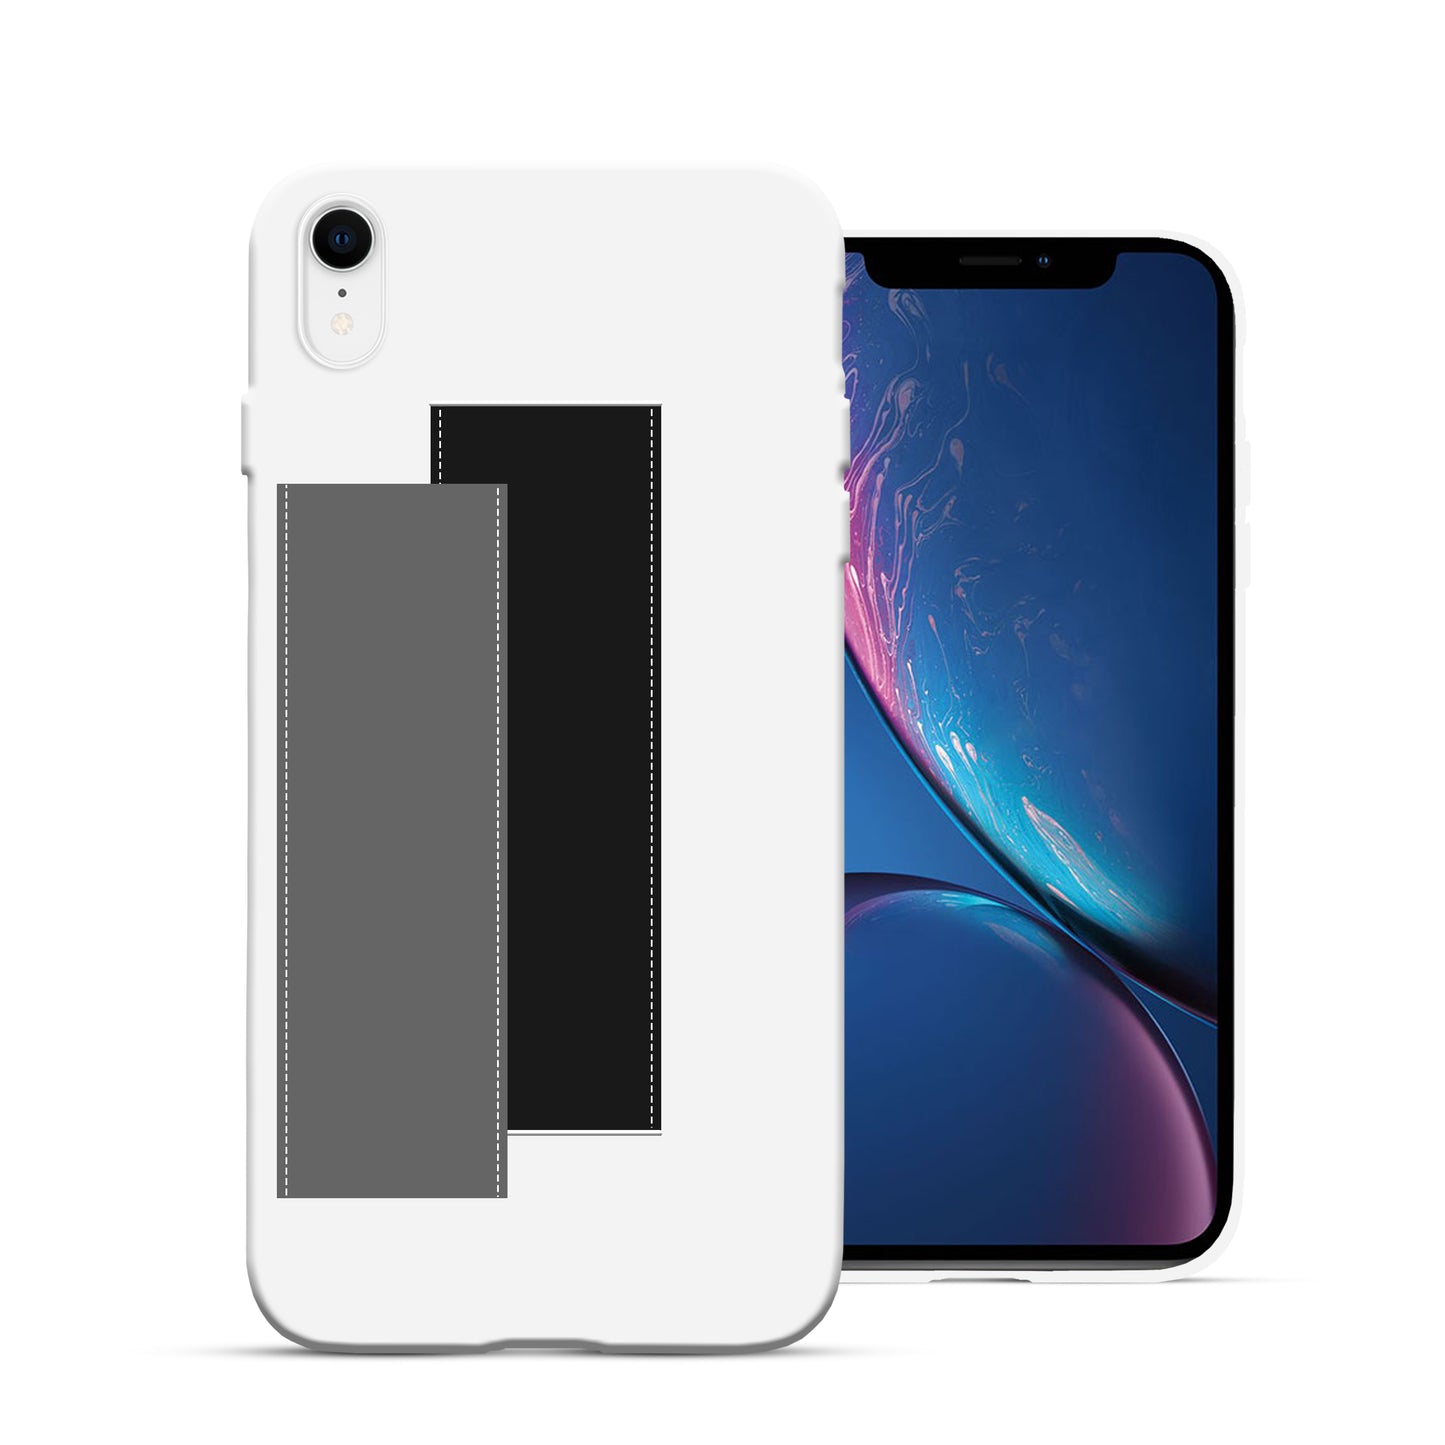 Finger Loop Phone Case For iPhone XR White With Black & Grey Strap